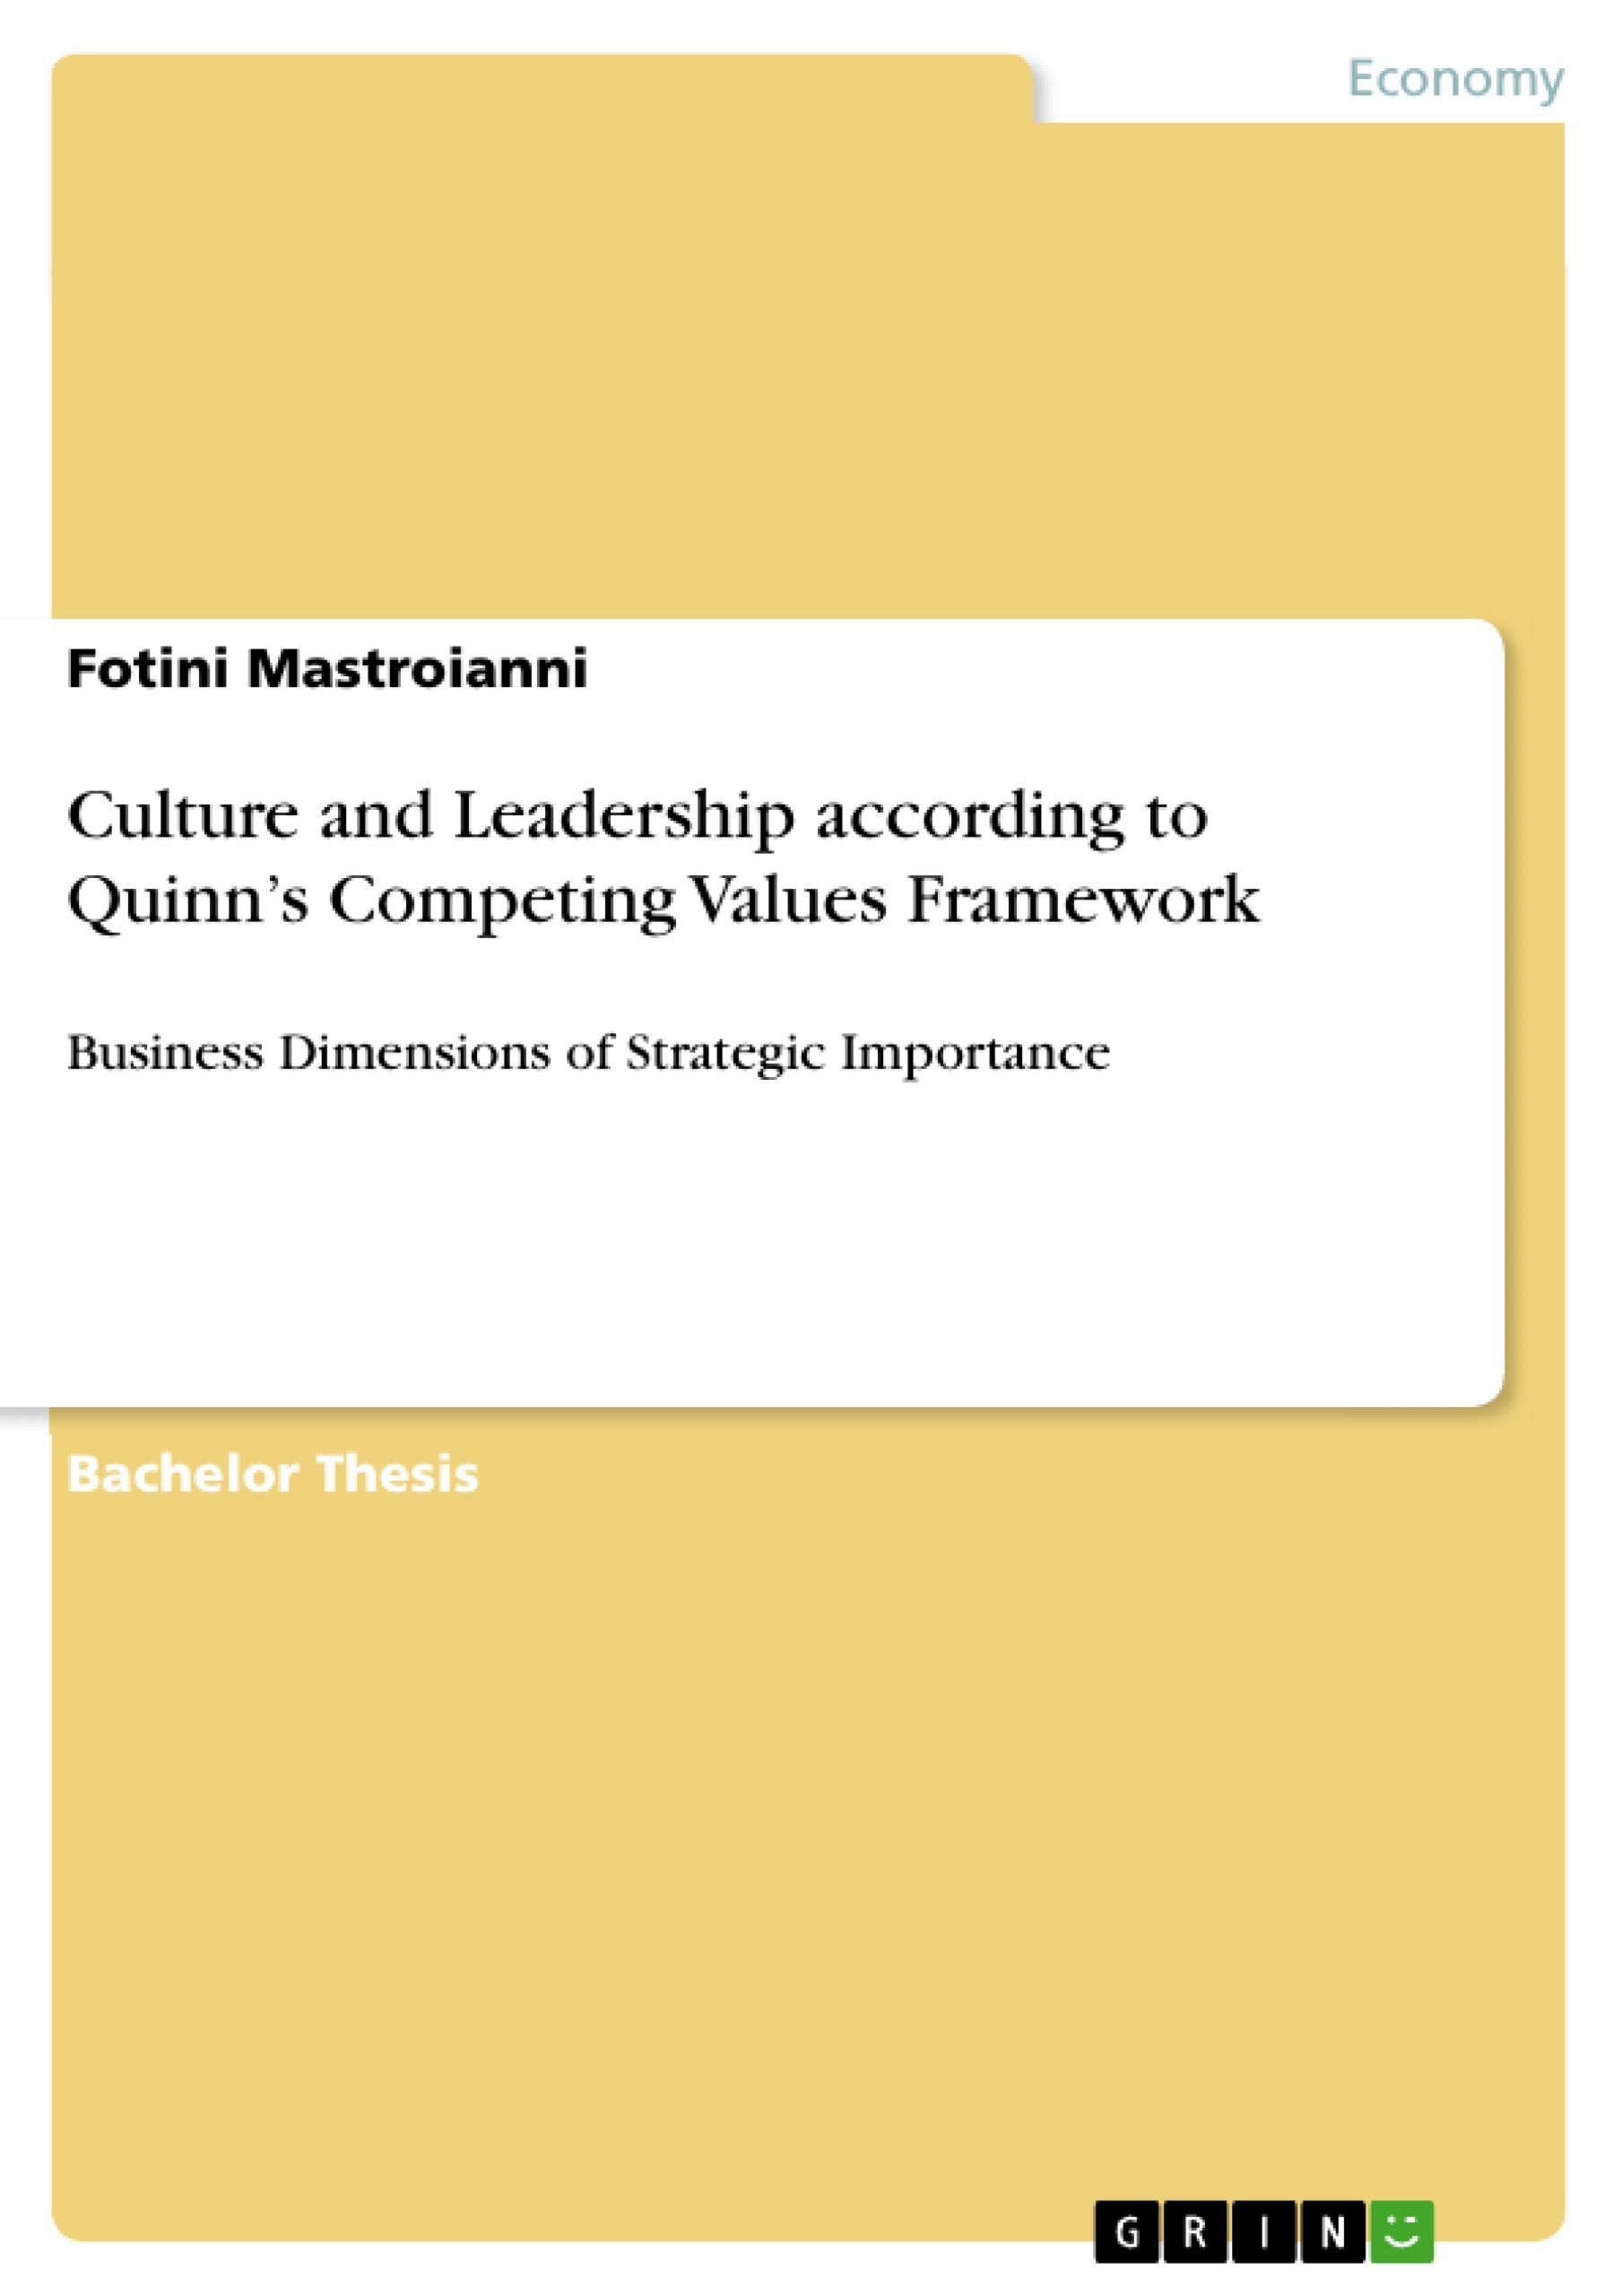 Título: Culture and Leadership according to Quinn’s Competing Values Framework